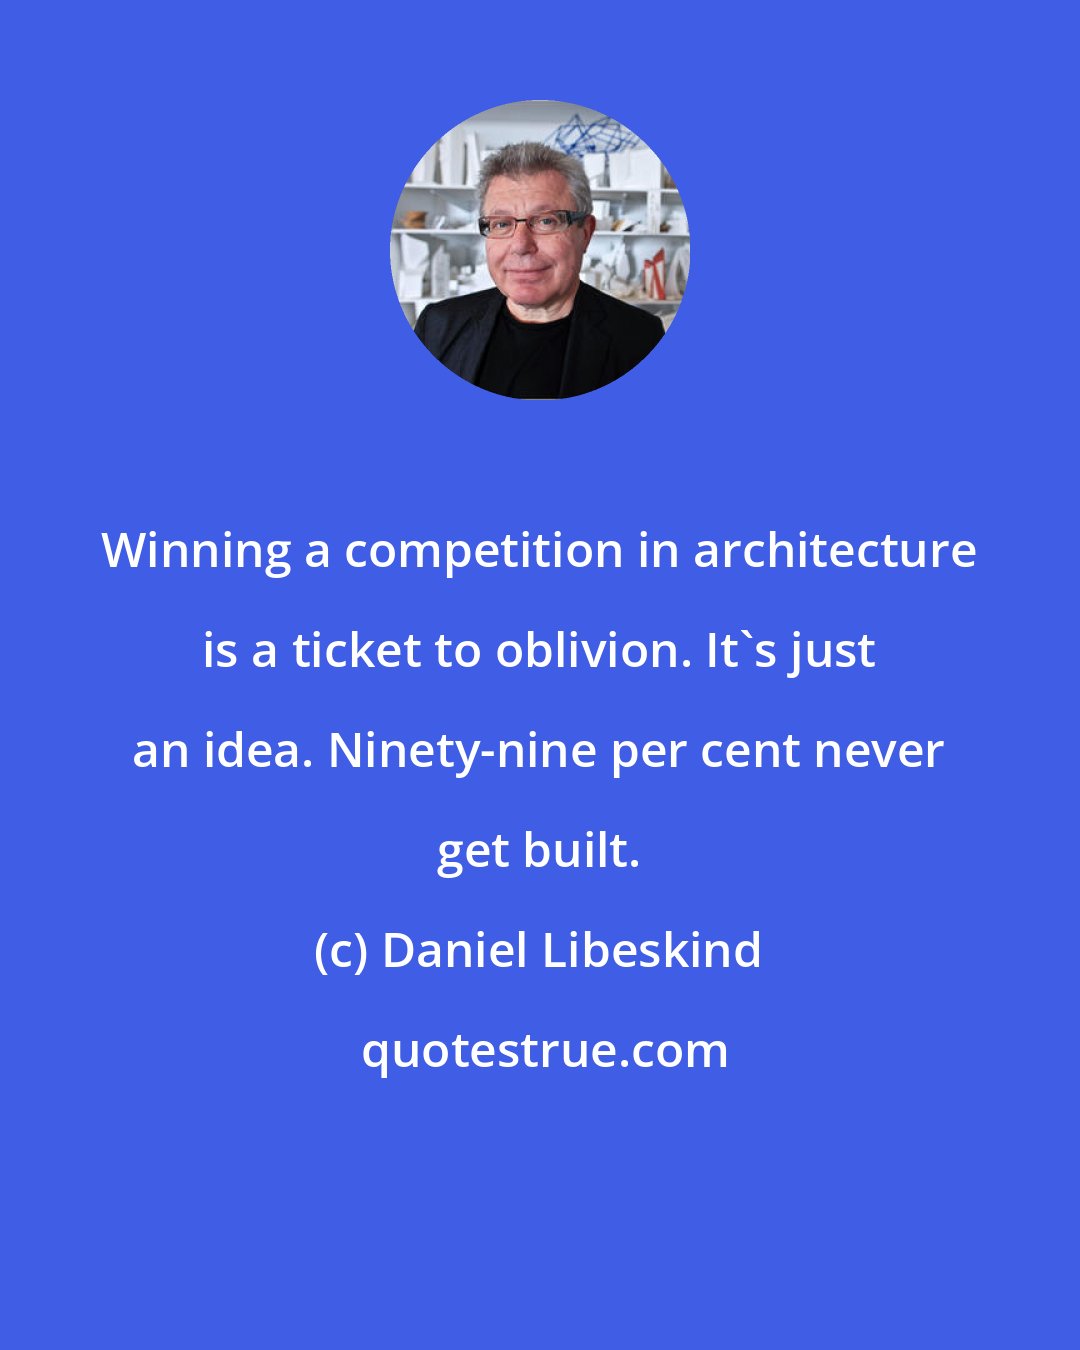 Daniel Libeskind: Winning a competition in architecture is a ticket to oblivion. It's just an idea. Ninety-nine per cent never get built.